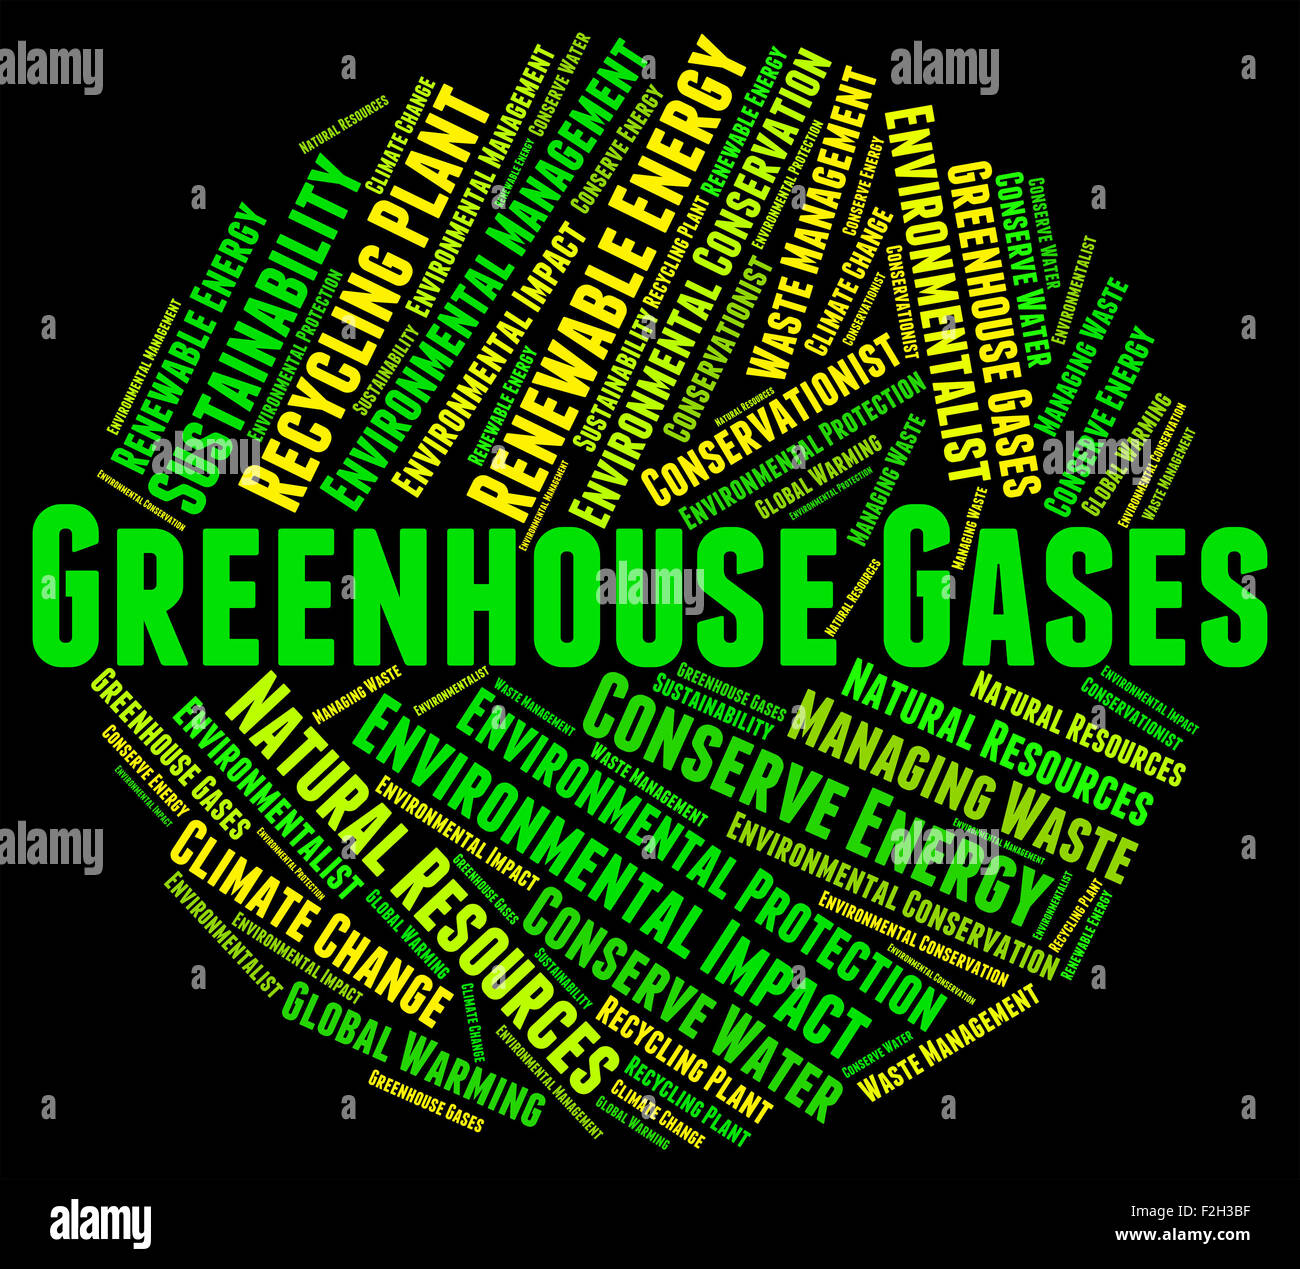 Greenhouse Gases Indicating Global Warming And Pollution Stock Photo